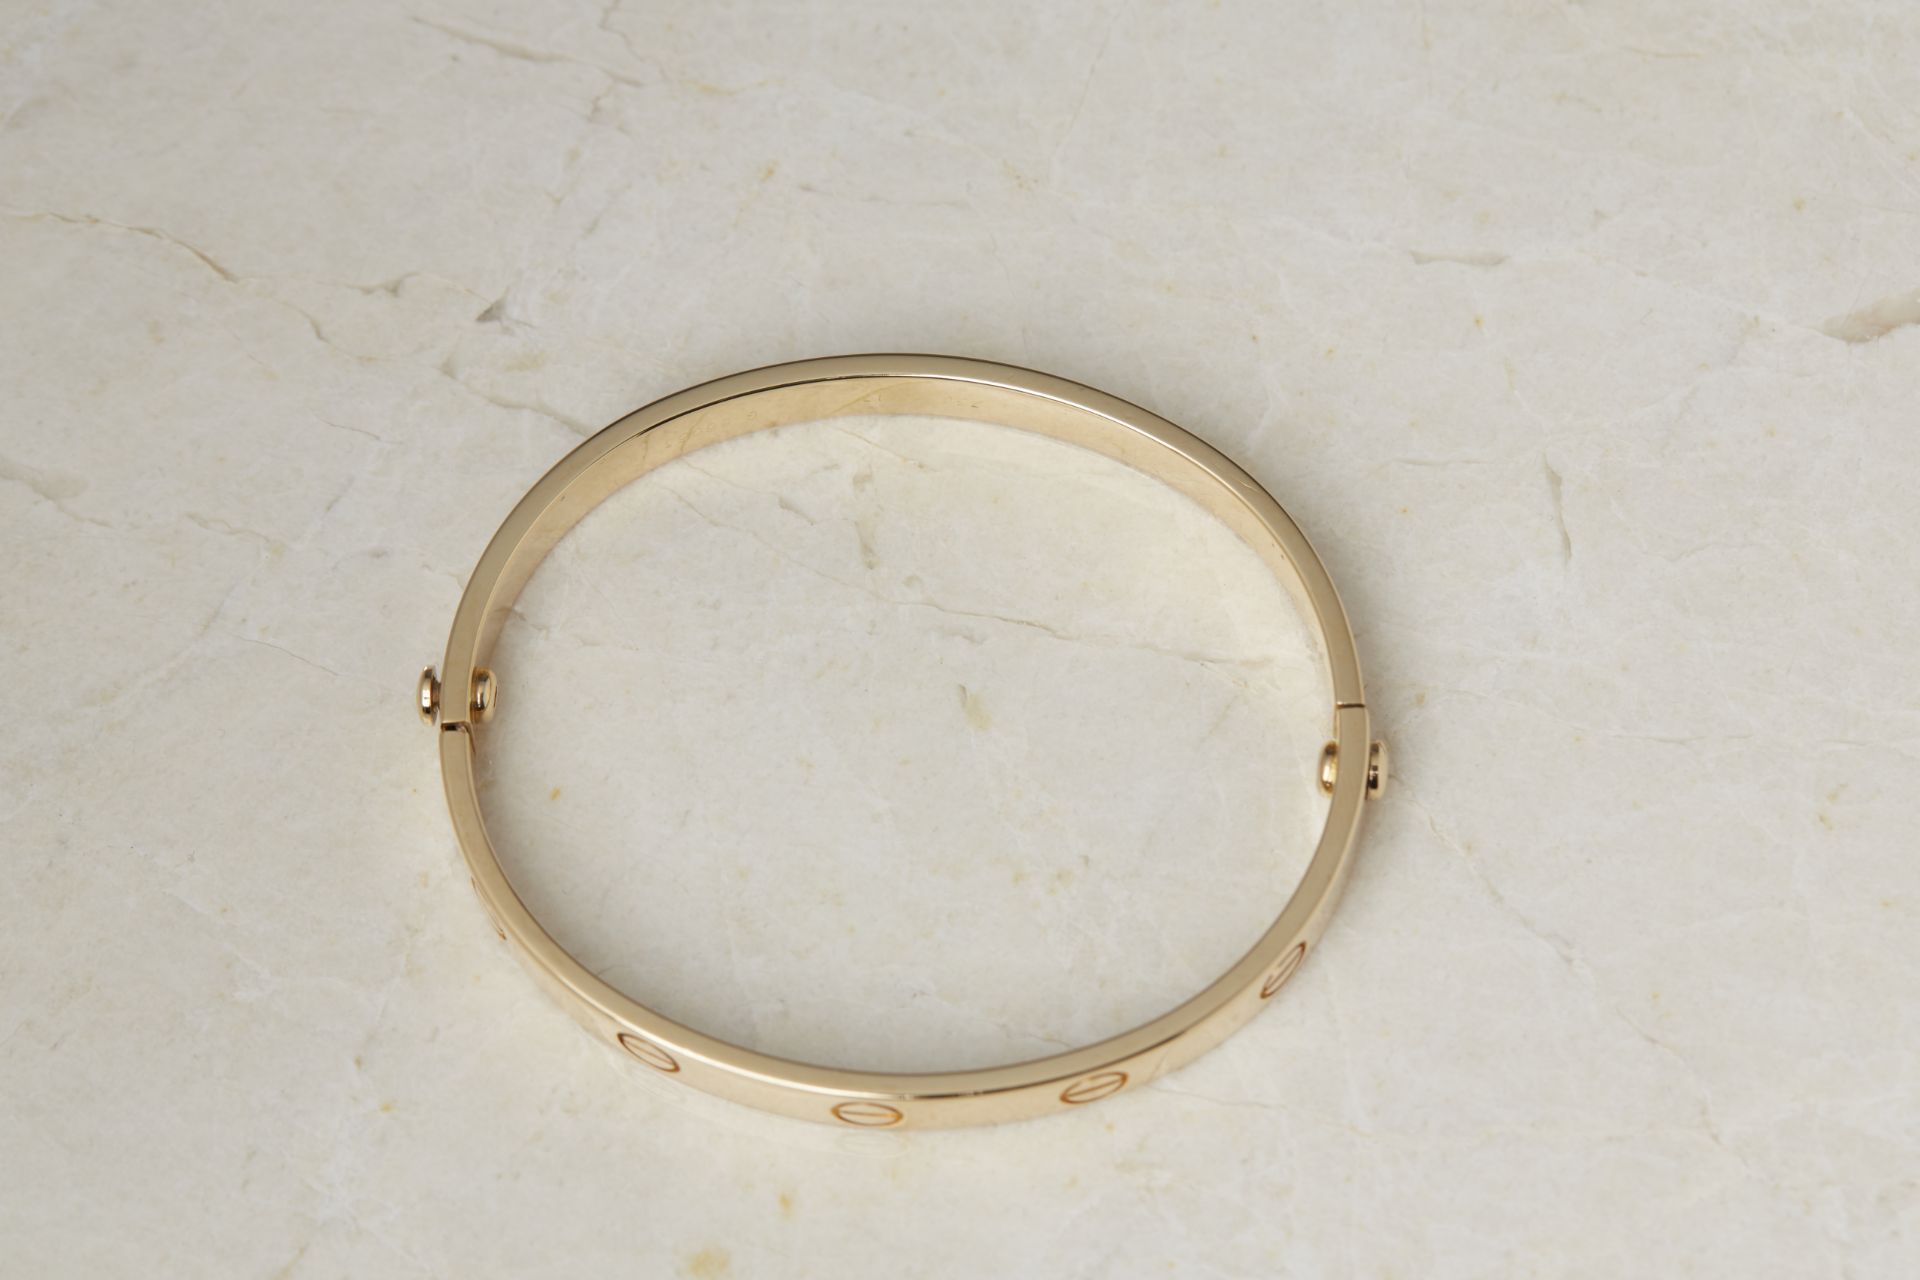 Cartier 18k Yellow Gold Love Bangle - Image 6 of 8